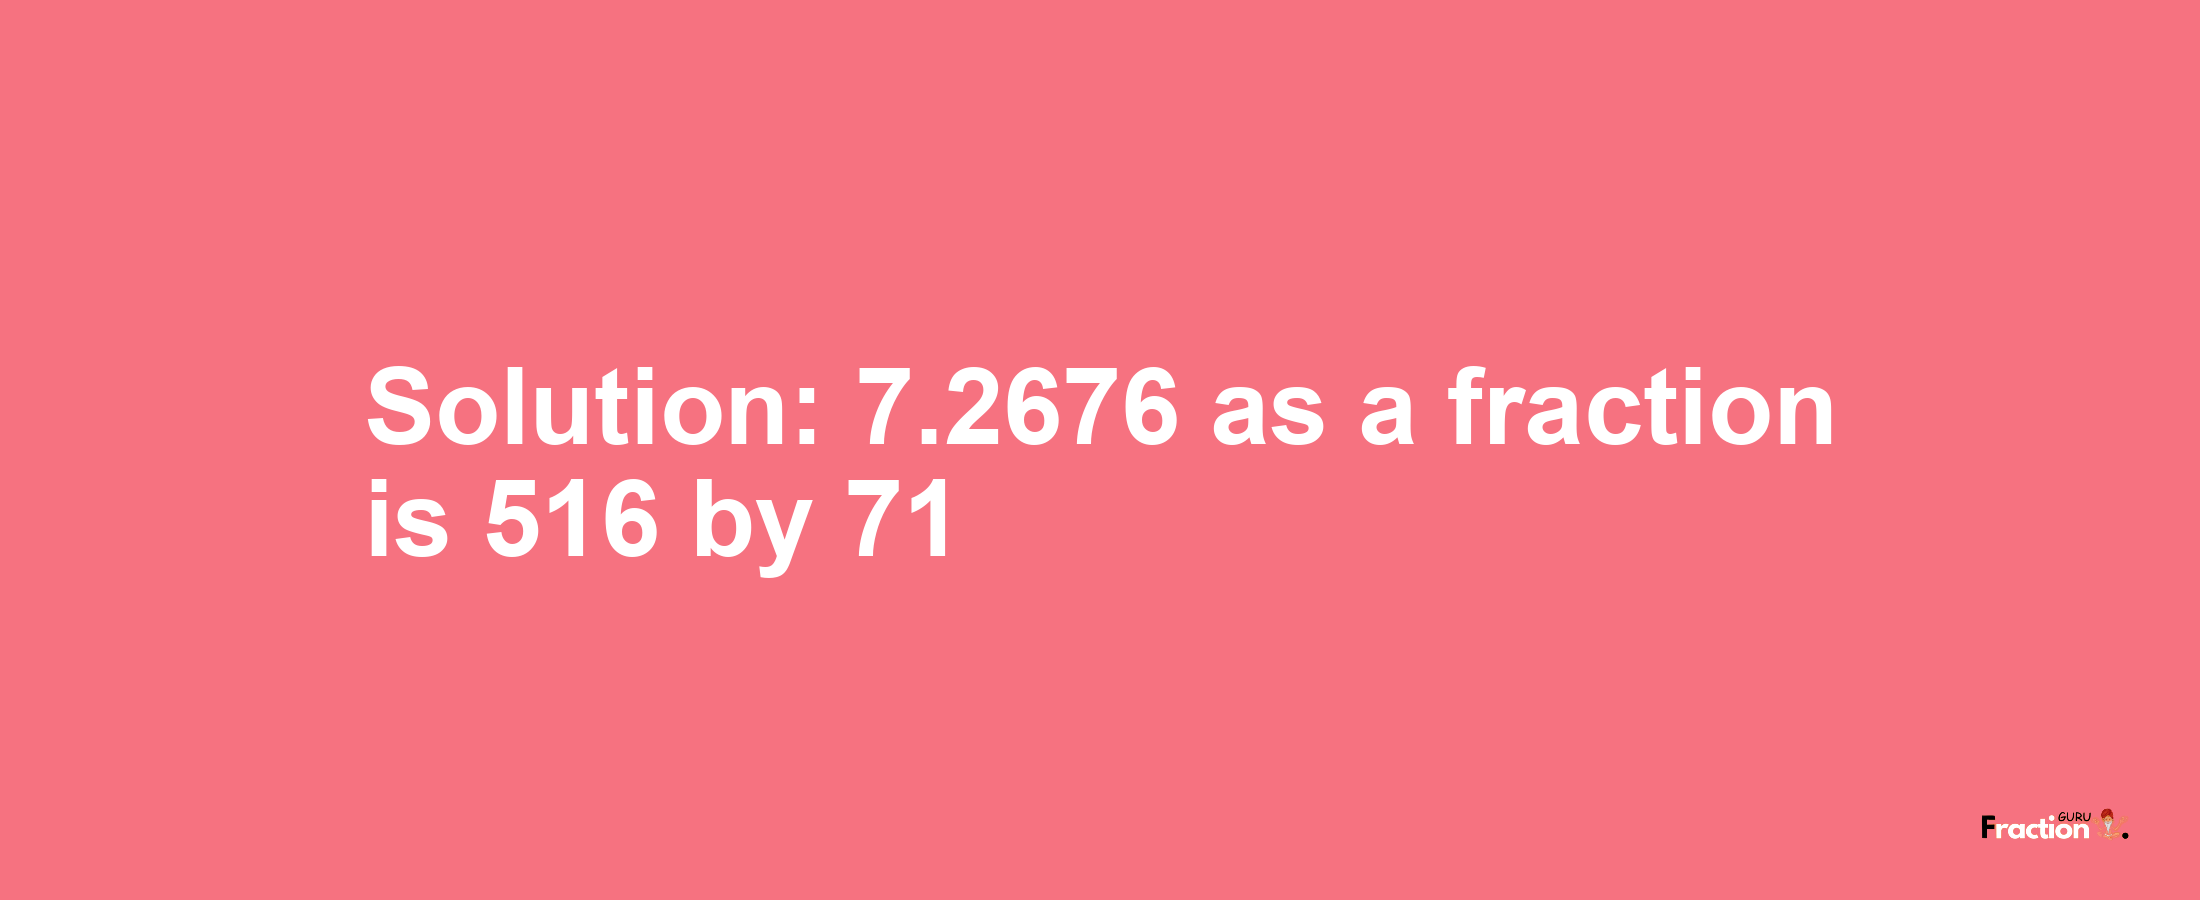 Solution:7.2676 as a fraction is 516/71